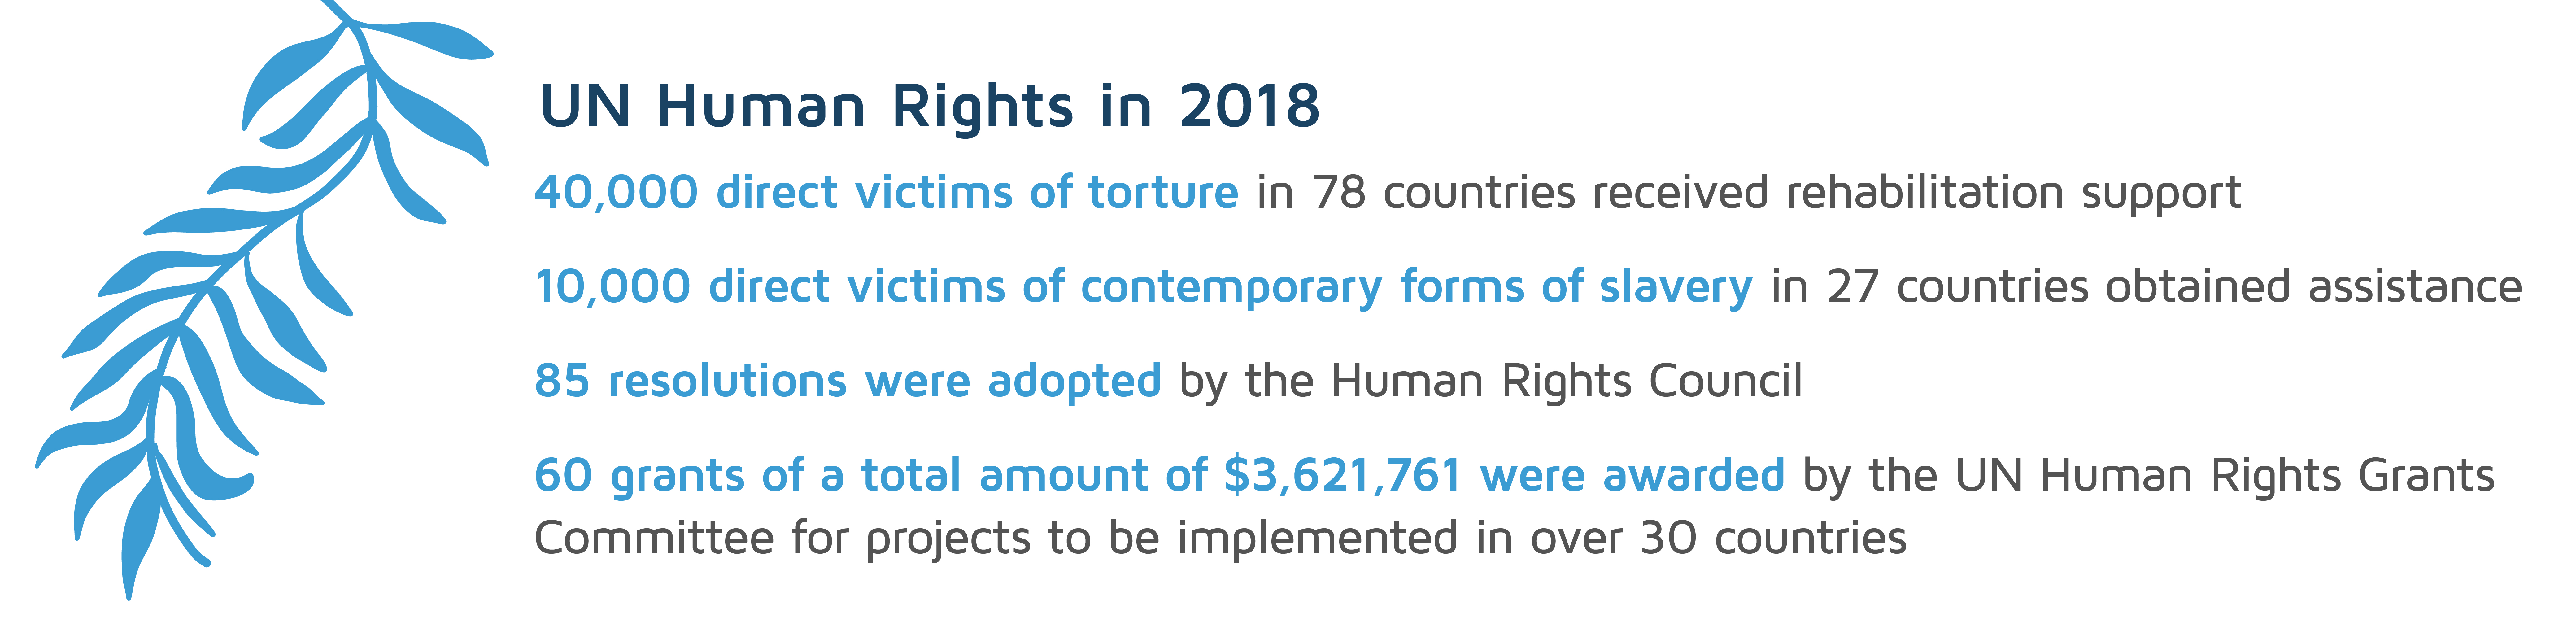 UN Human Rights in 2018